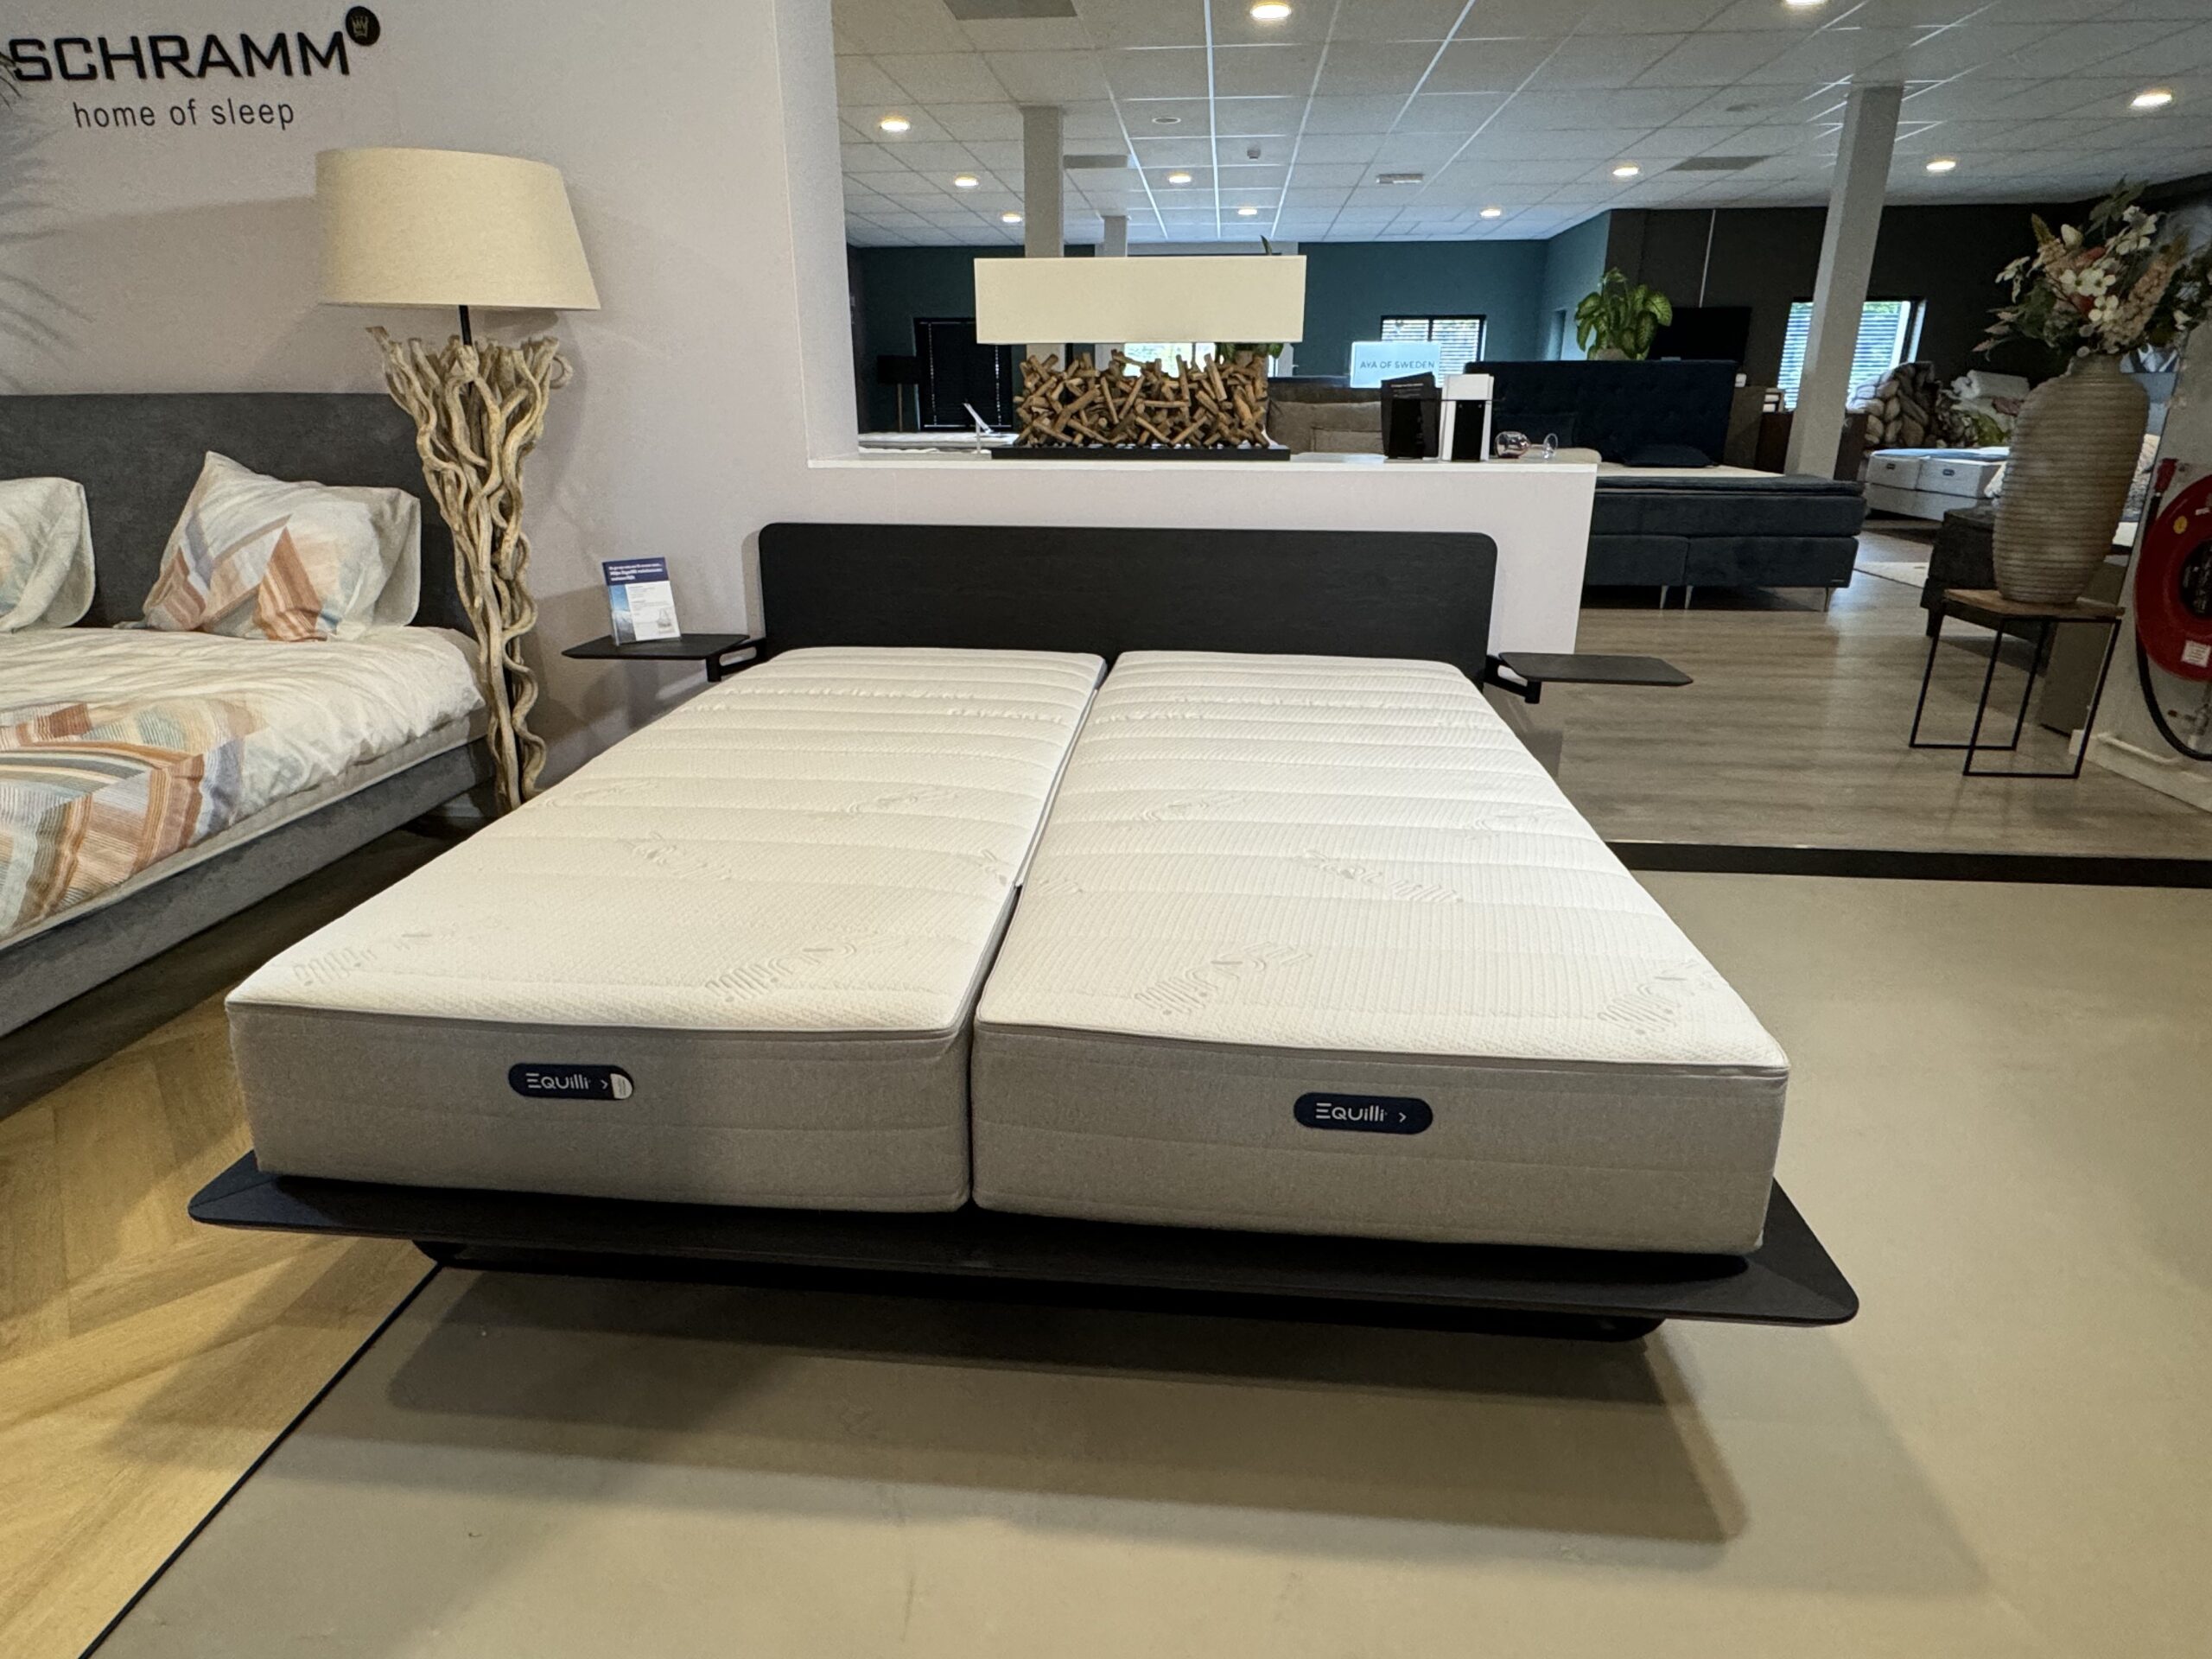 Equilli Less bed | Showroommodel